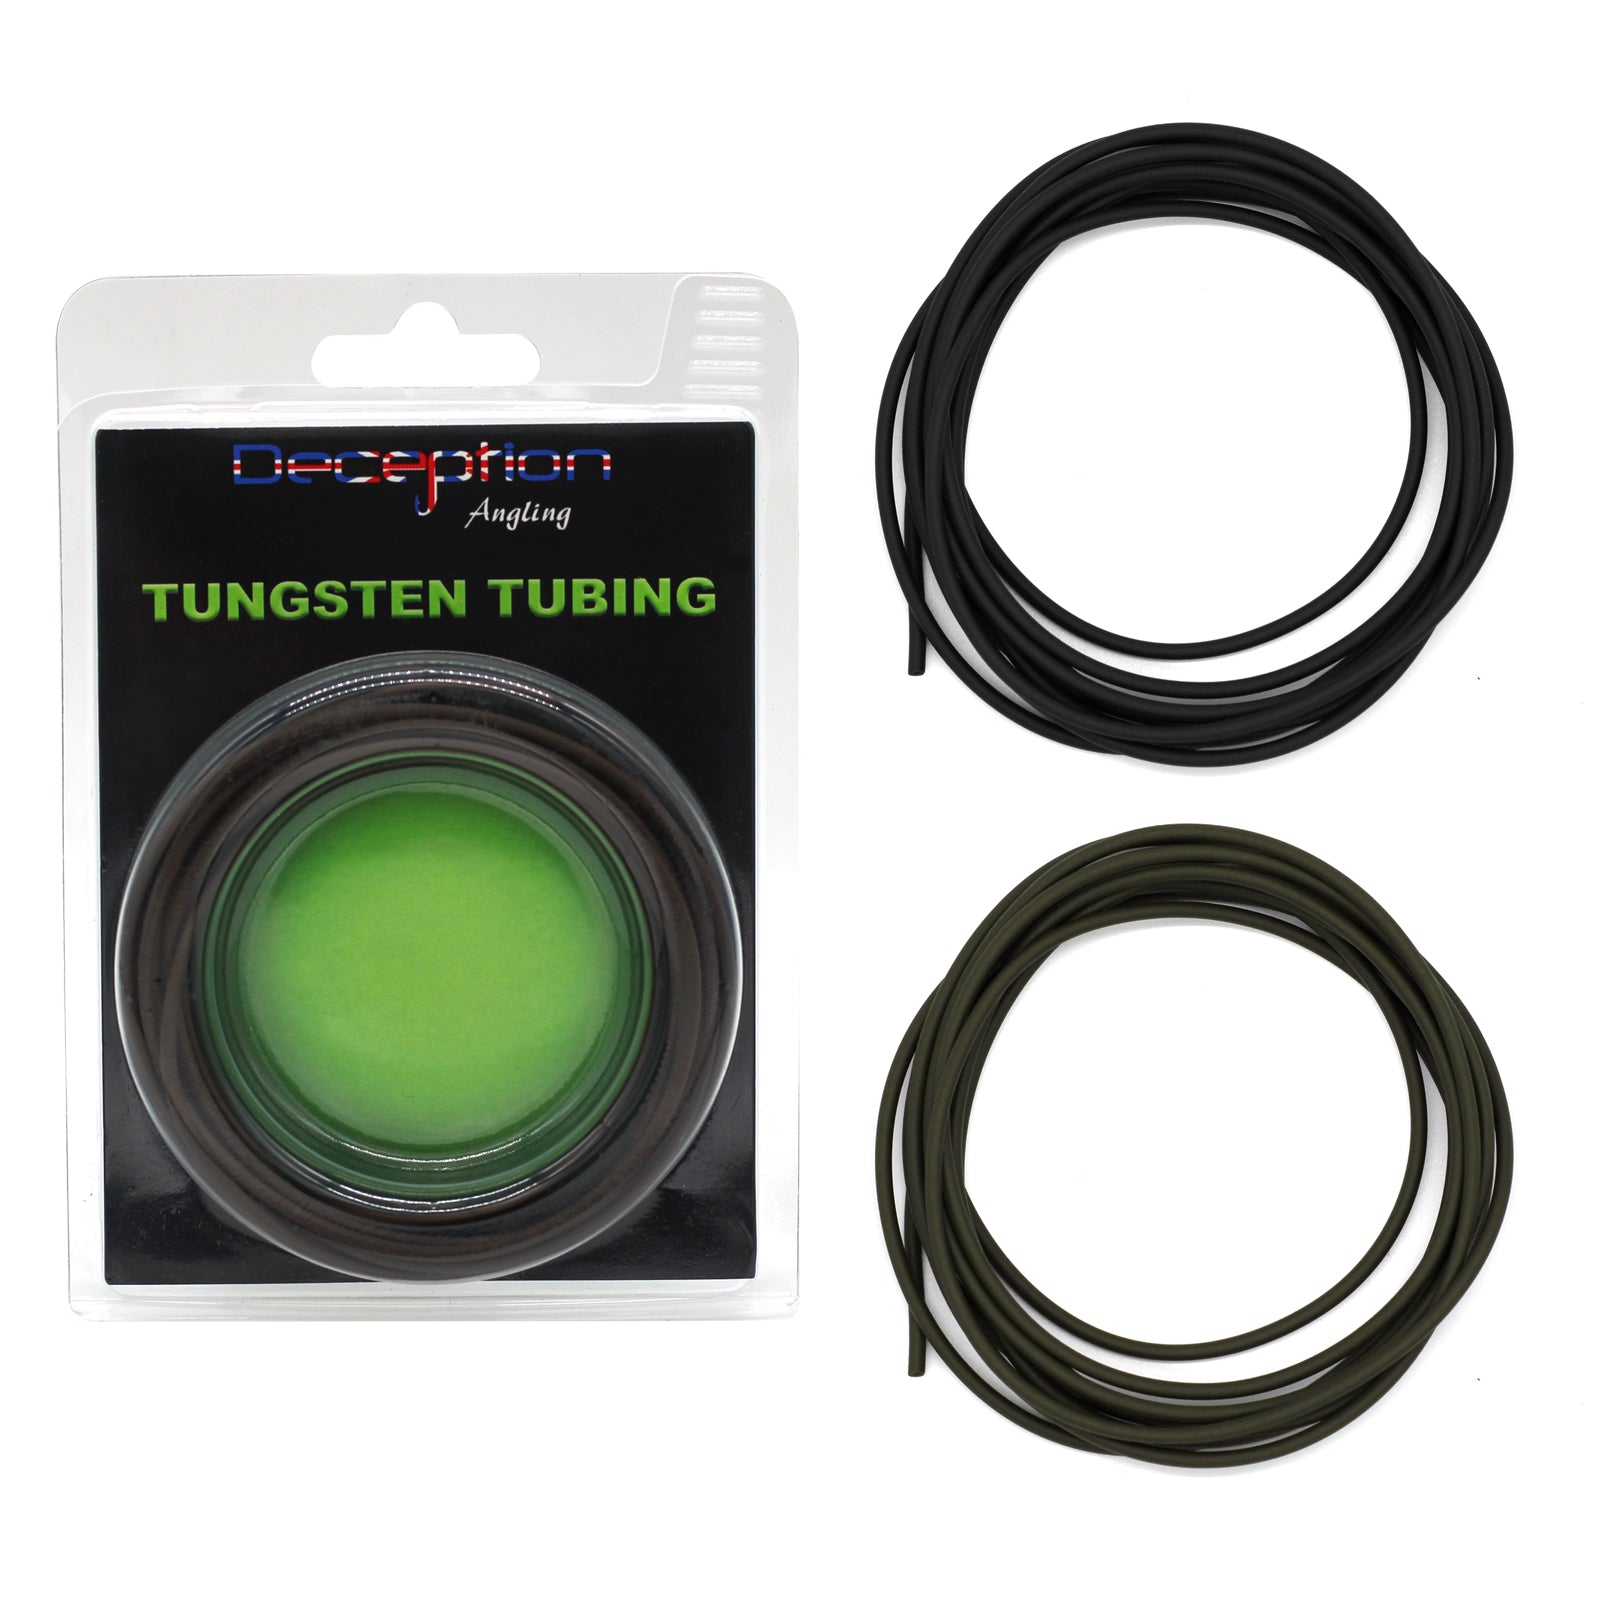 Deception Angling Tungsten Tubing for Fishing in Two Colours